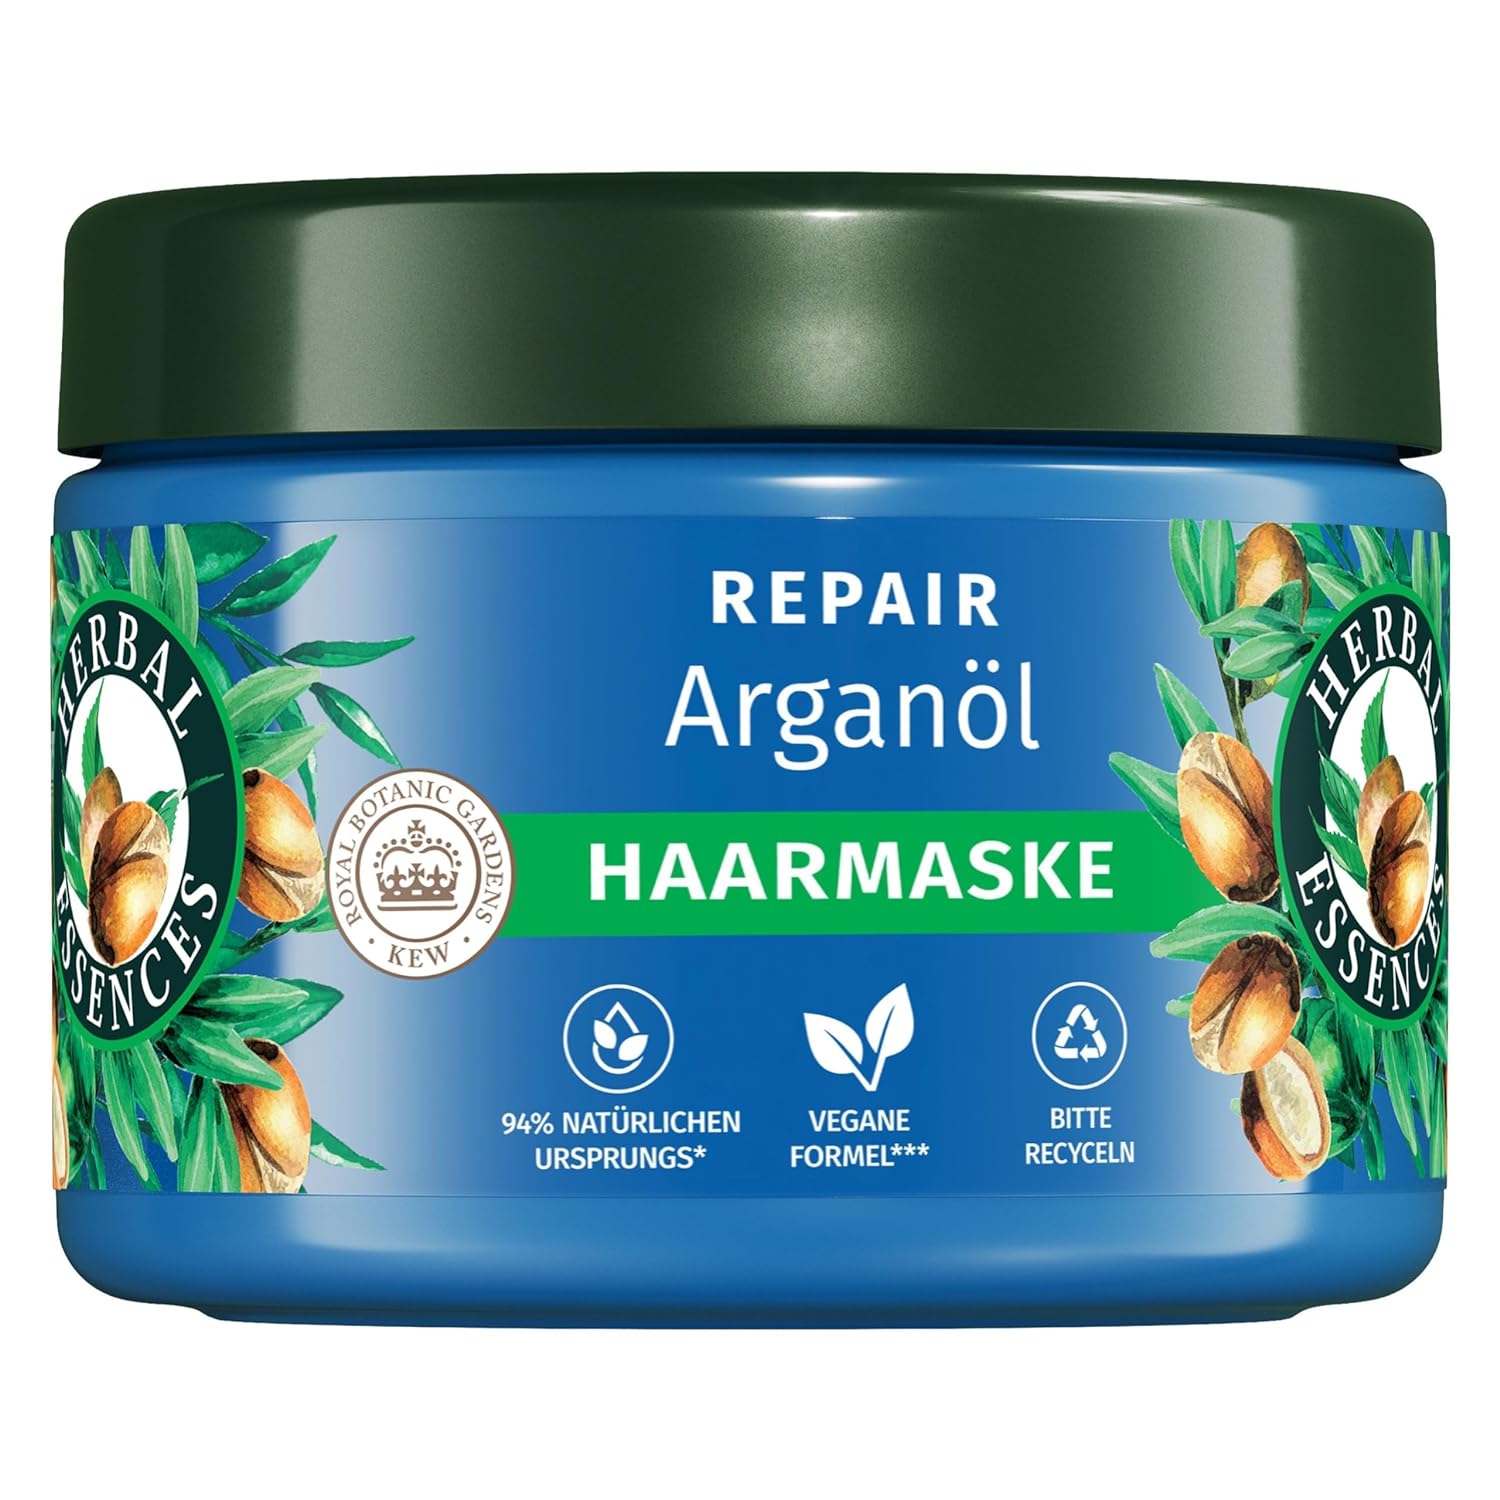 Herbal Essences Repair Hair Mask with Argan Oil 300 ml from Damaged to Softer, Shiny Hair, Intensive Care, with Ingredients of Natural Origin, Vegan